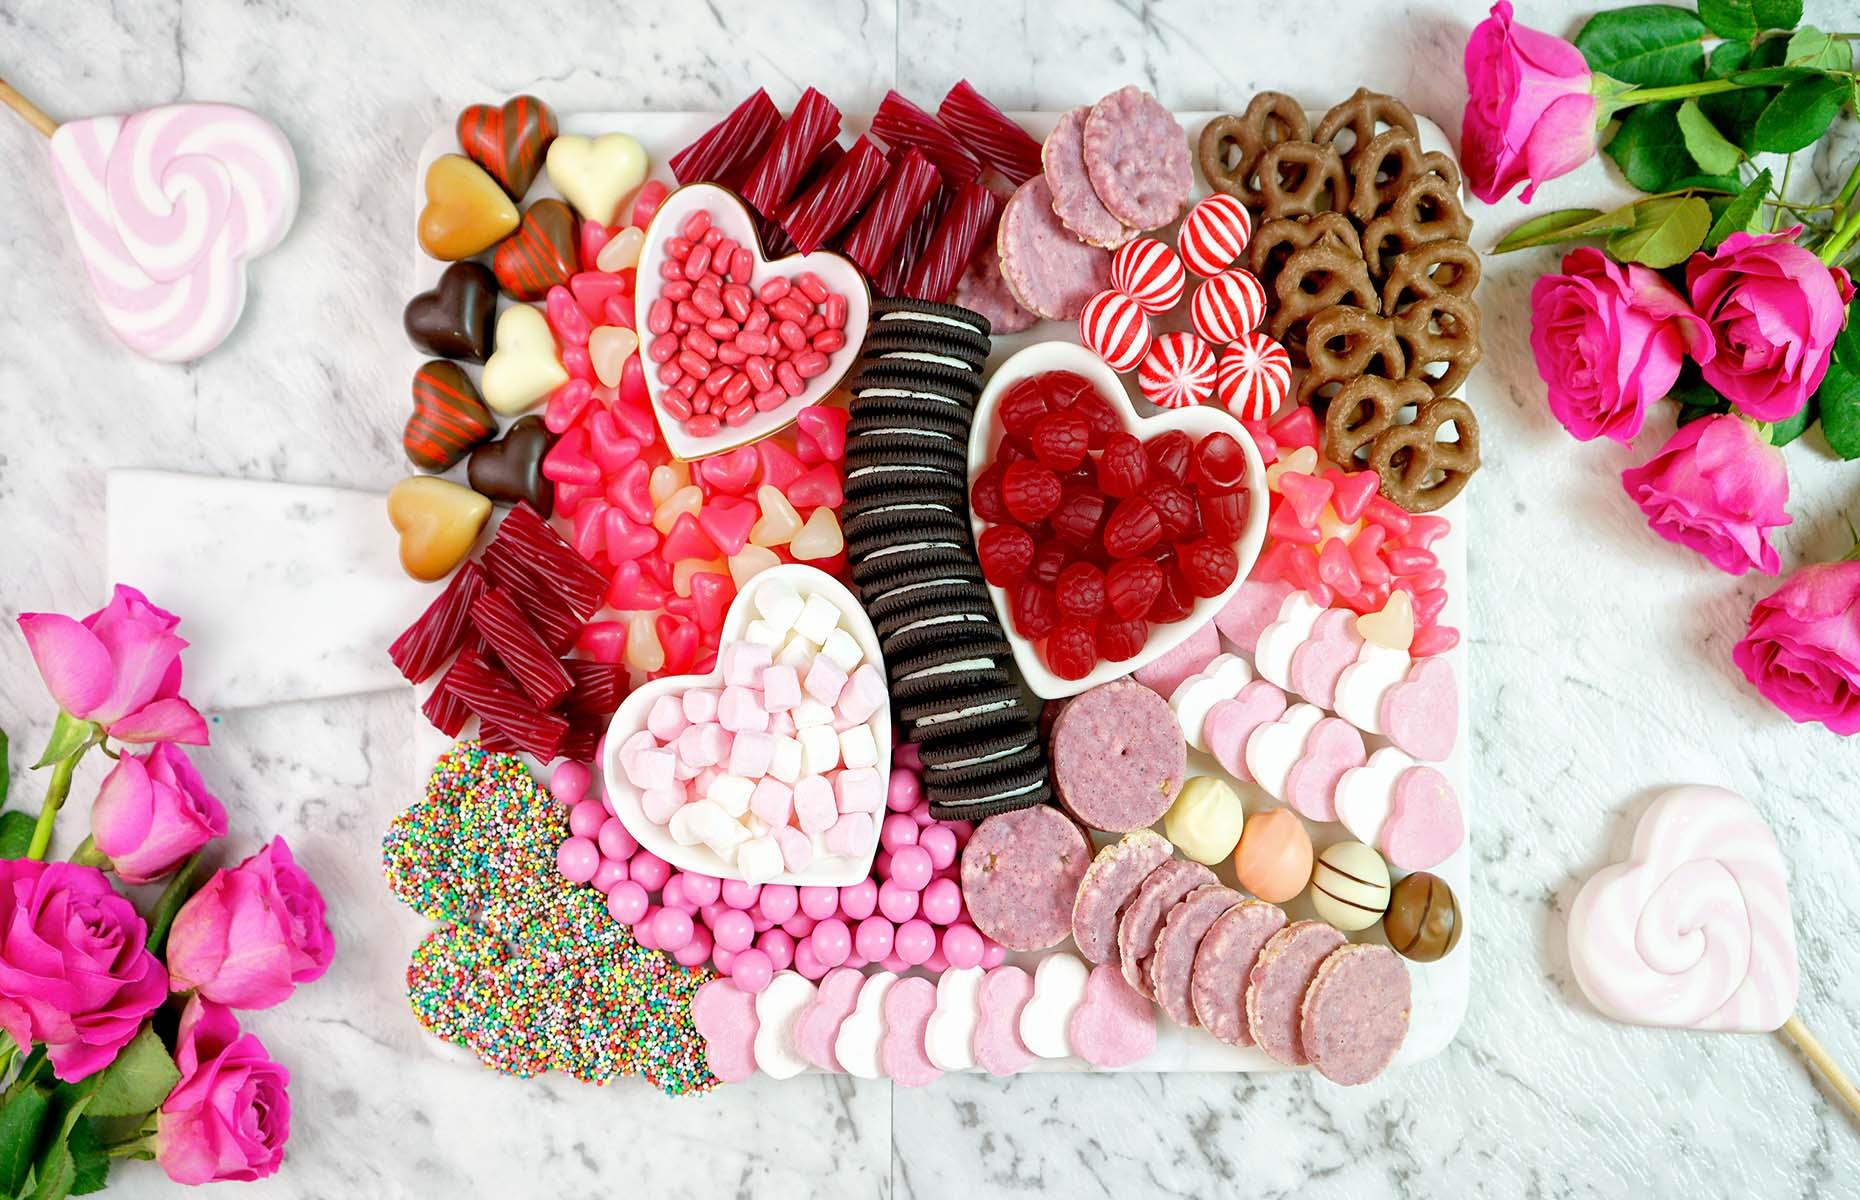 <p>For a sweet treat that's perfect for Valentine's Day, make a pink-and-red grazing board using heart-shaped sweets. This is an easy board that will only take a quick trip to the shops, and in February you'll have plenty of options to choose from. You can use <a href="https://www.zwilling.com/uk/staub-ceramique-9-cm-heart-ceramic-mini-cocotte-cherry-40511-092-0/40511-092-0.html?cgid=our-brands_staub_ceramics_minis">heart-shaped ramekins</a> to make the board extra pretty.</p>  <p><a href="https://www.lovefood.com/recipes/59755/chocolate-fondue-recipe"><strong>Pair your board with this homemade chocolate fondue</strong></a></p>